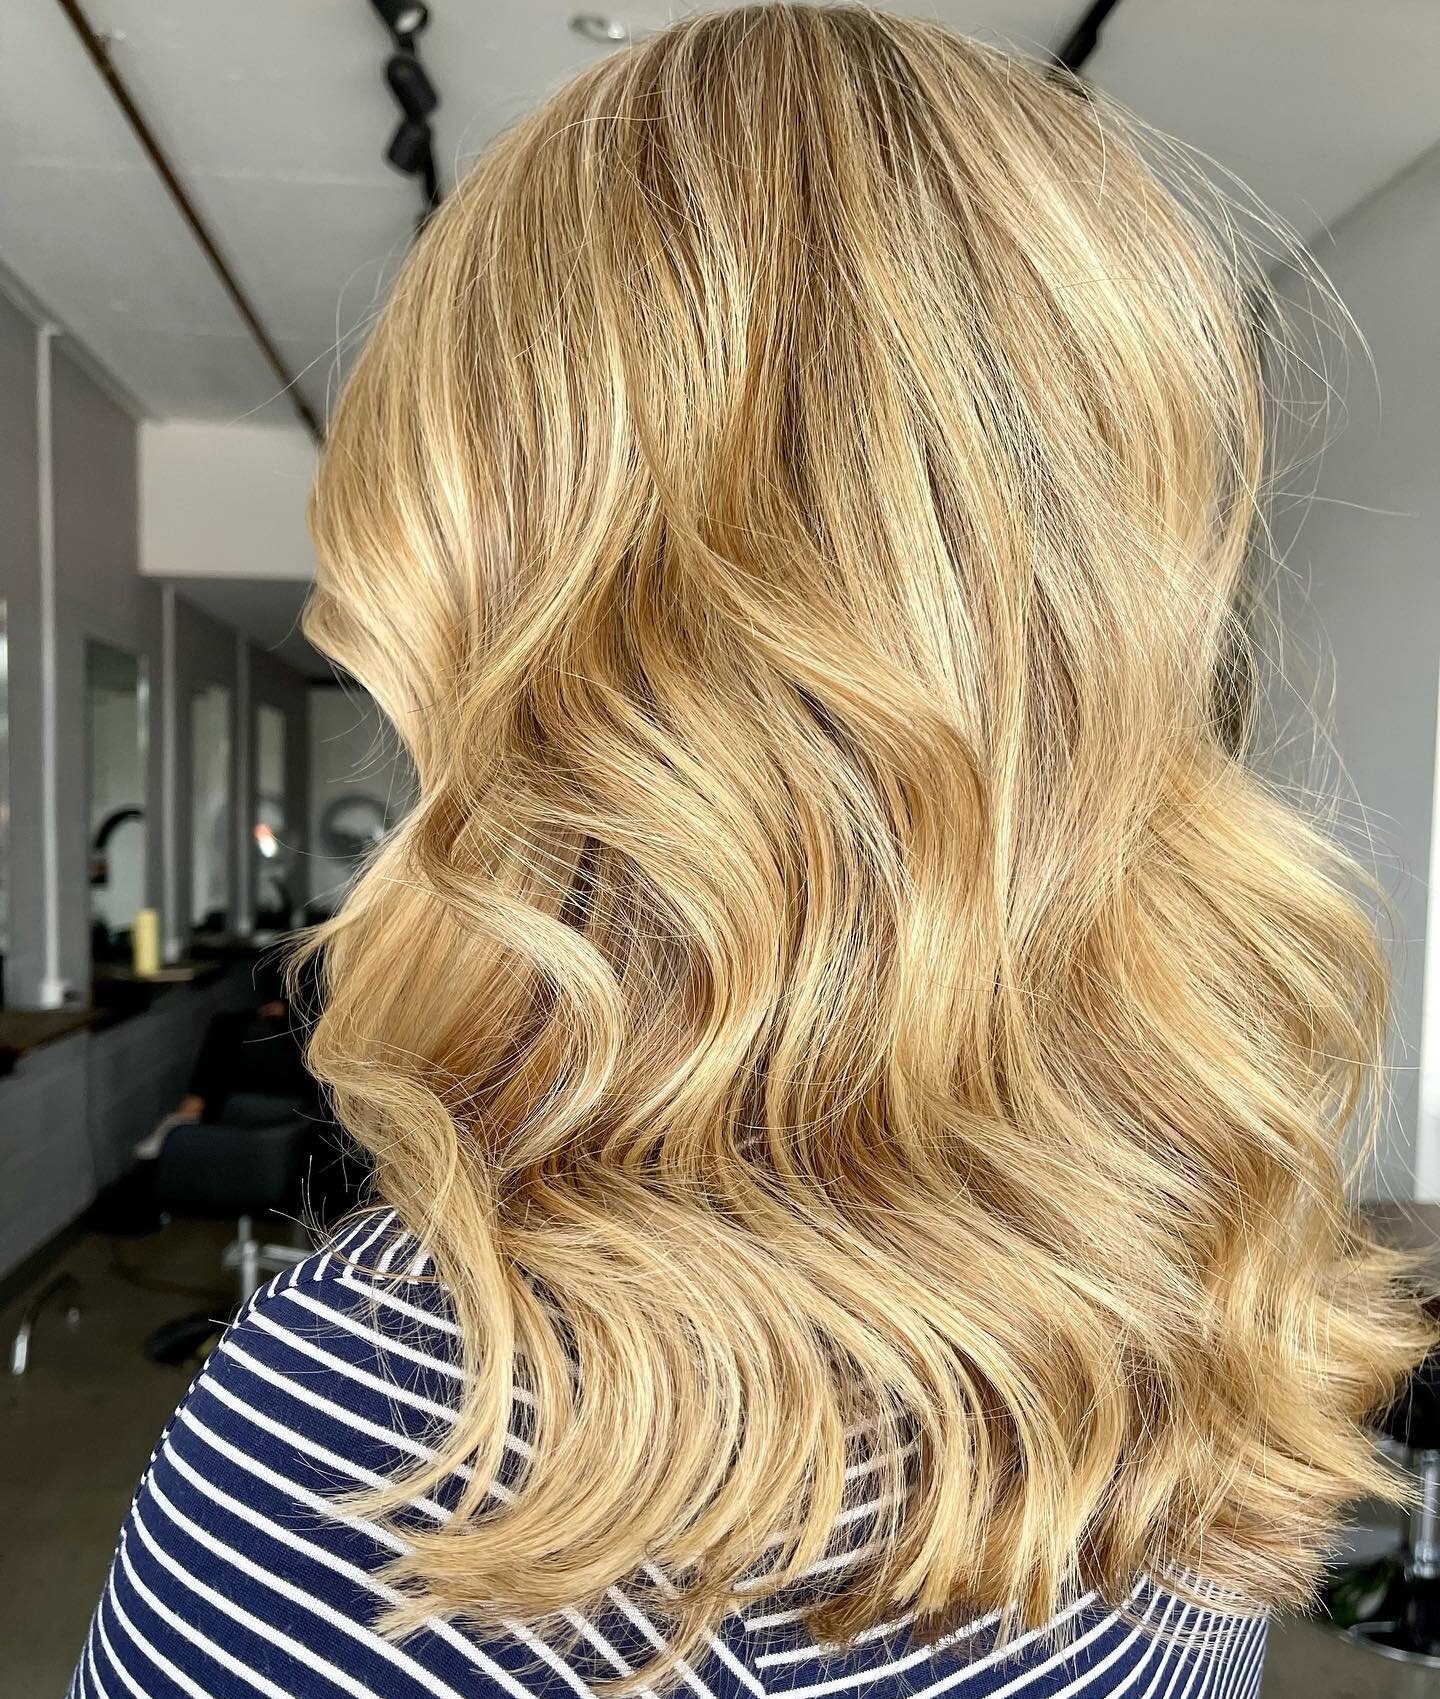 𝙂𝙊𝙇𝘿𝙀𝙉 𝘽𝙇𝙊𝙉𝘿𝙀
Loving the variation of warm tones in this beautiful blonde🤍
Hair: #letitia_letitiaboothhair 
.
.
.
.
#letitiaboothhair #matrix #matrixaustralia #delorenzohaircare #foilmefoils #blonde #blondehair #cammeray #cammeraysalon #